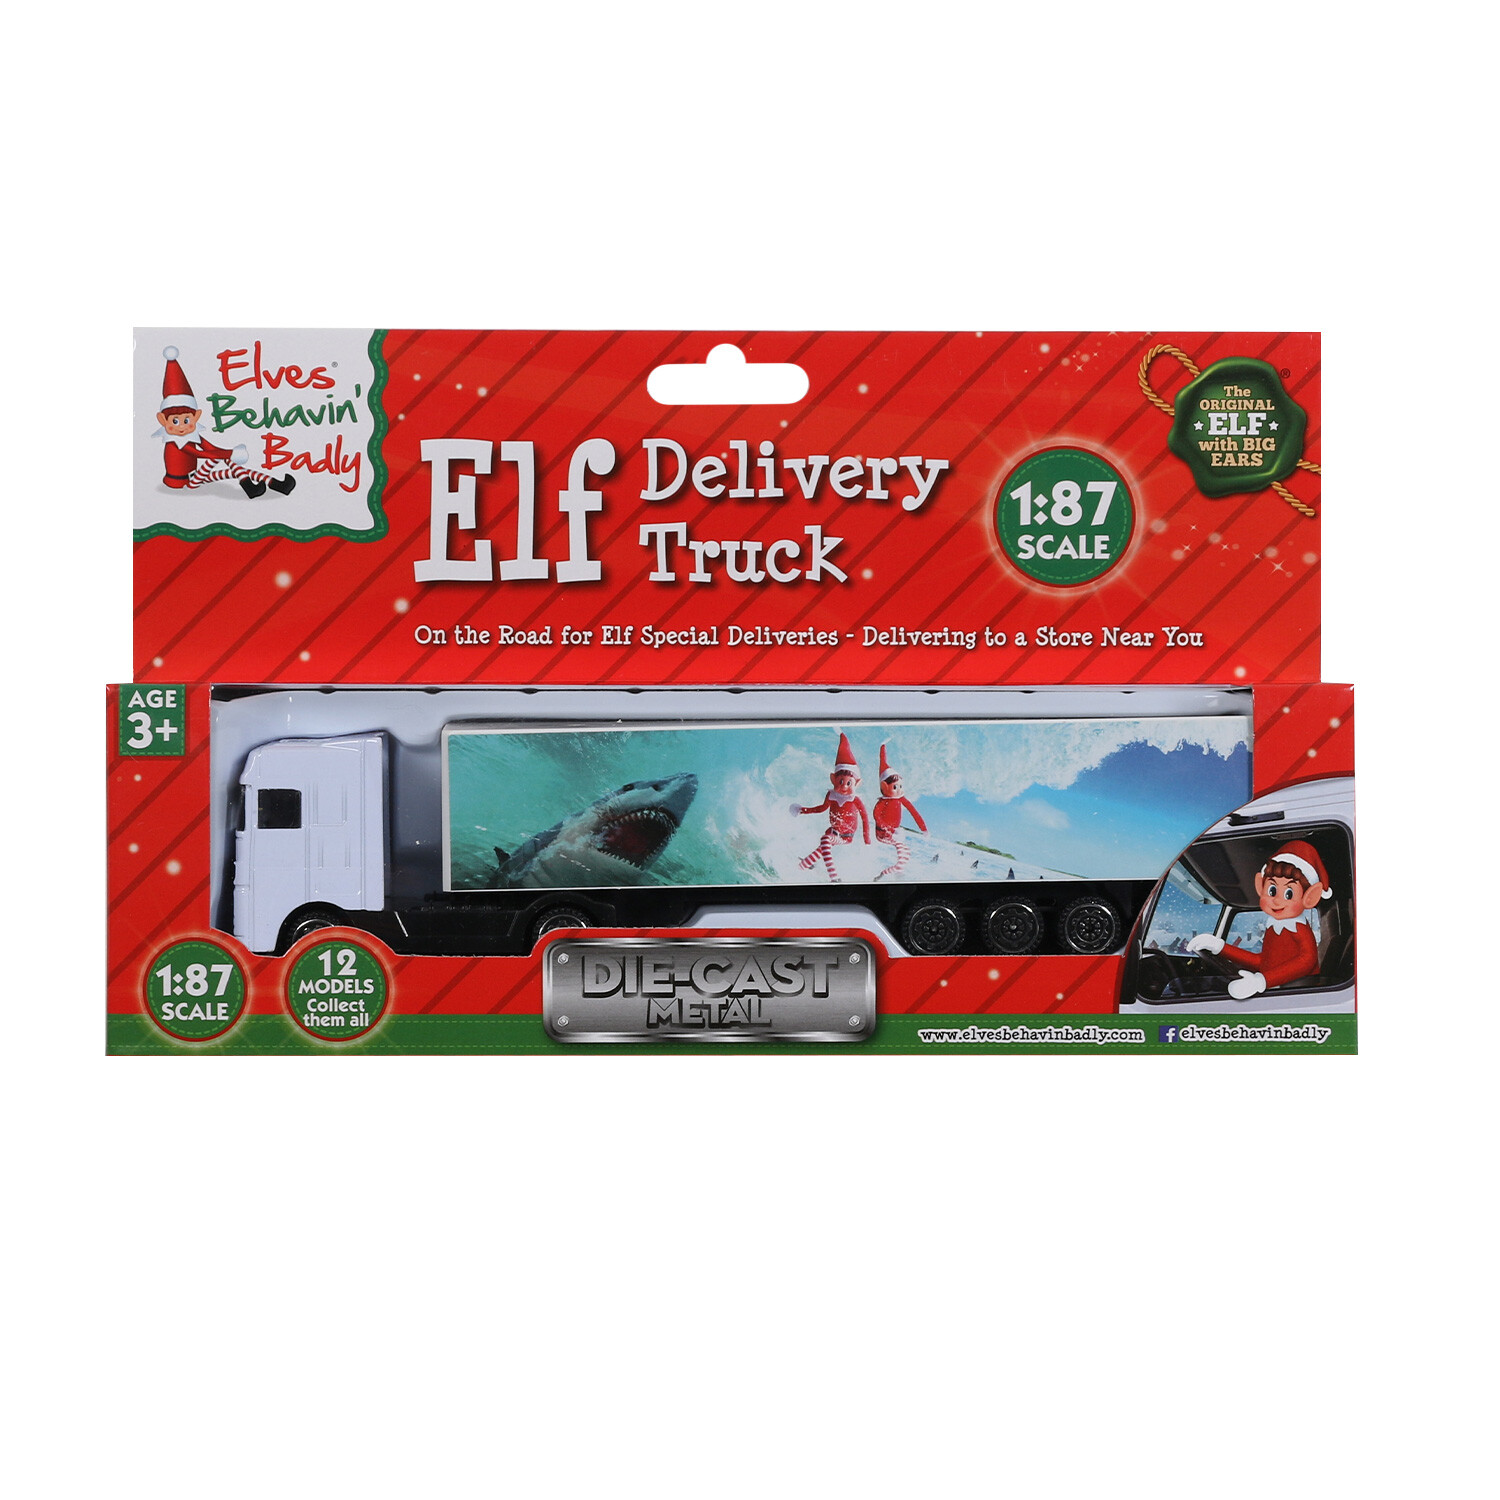 Elf Delivery Truck Image 6